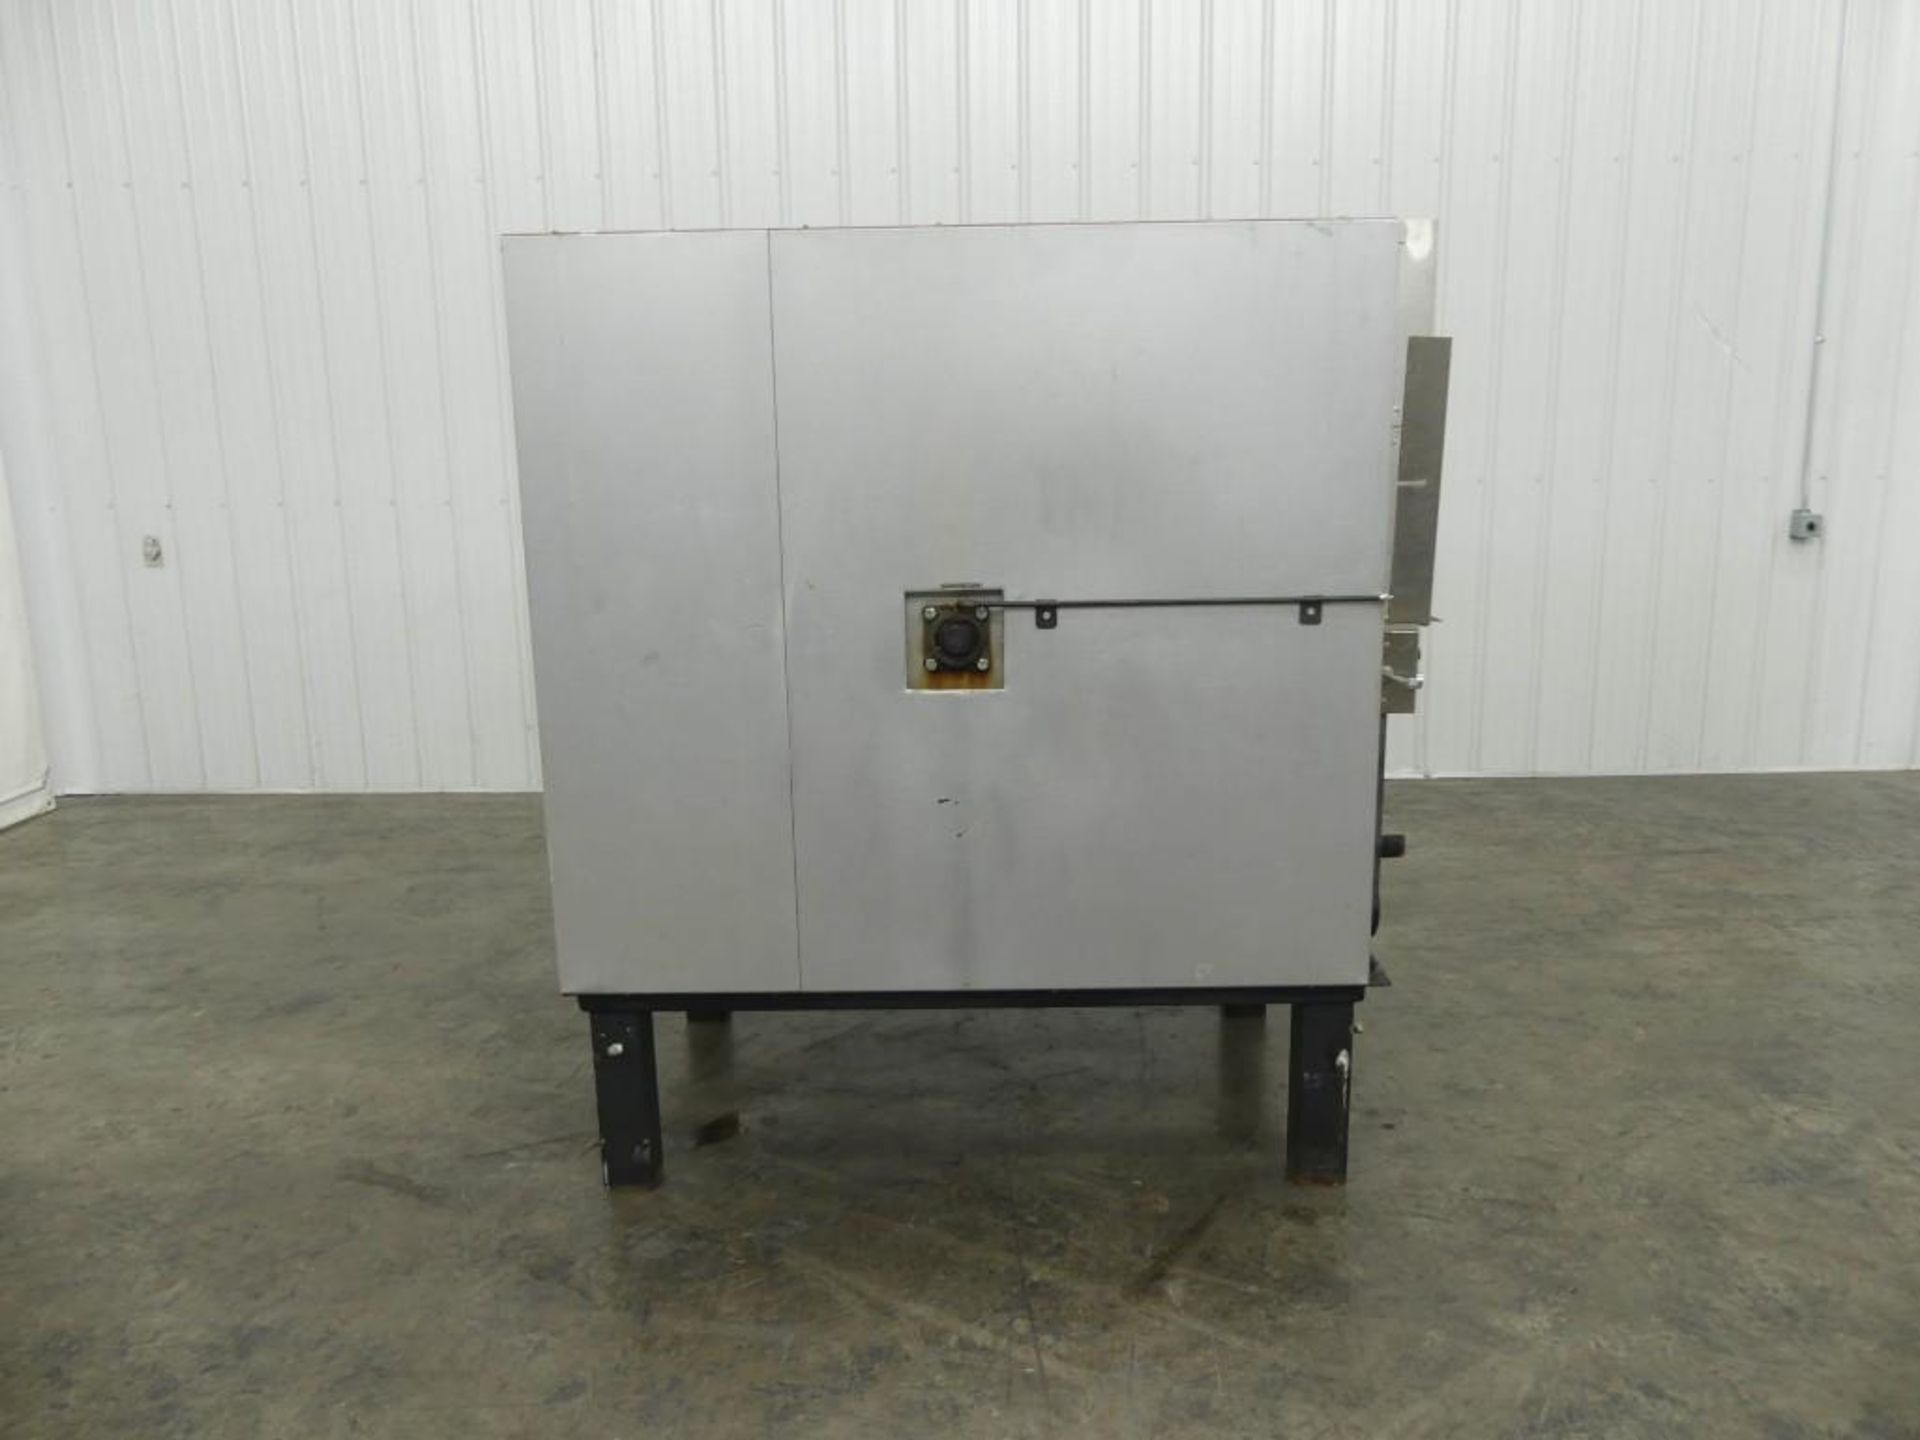 Bolling 500 M 5 Tray Revolving Rack SS Oven - Image 6 of 7